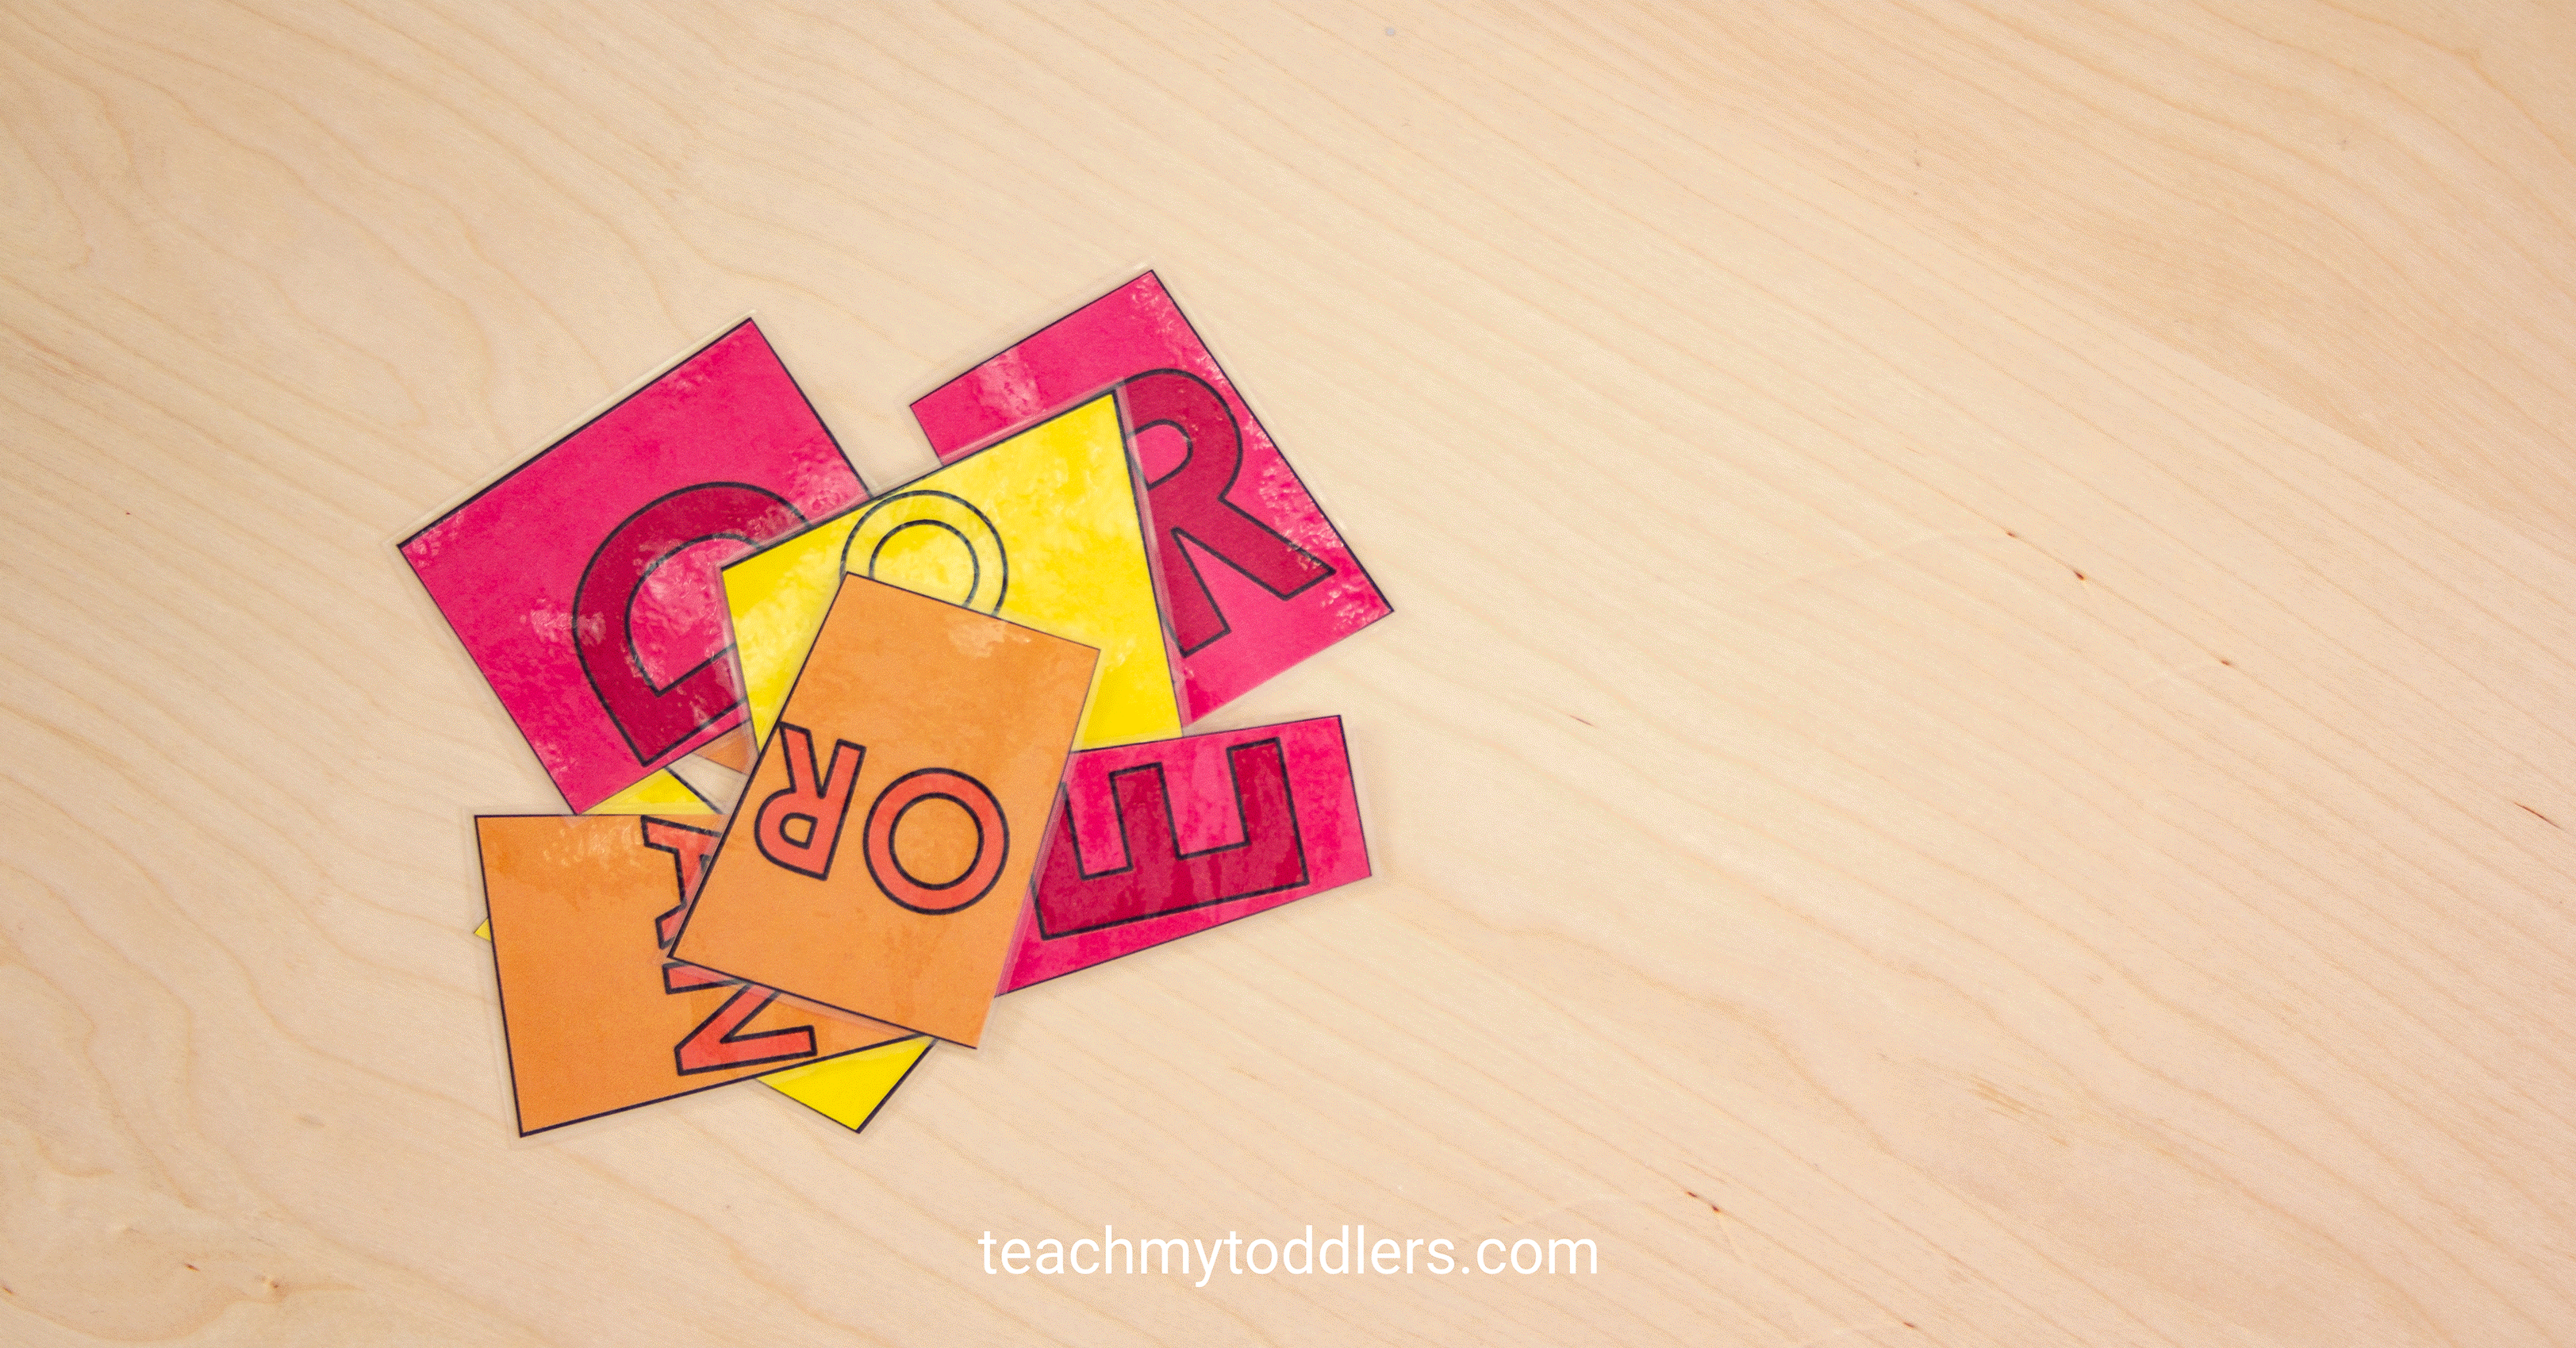 Red-Orange-Yellow-example-gif-on-how-to-use-puzzle-pieces-to-teach-toddlers-colors